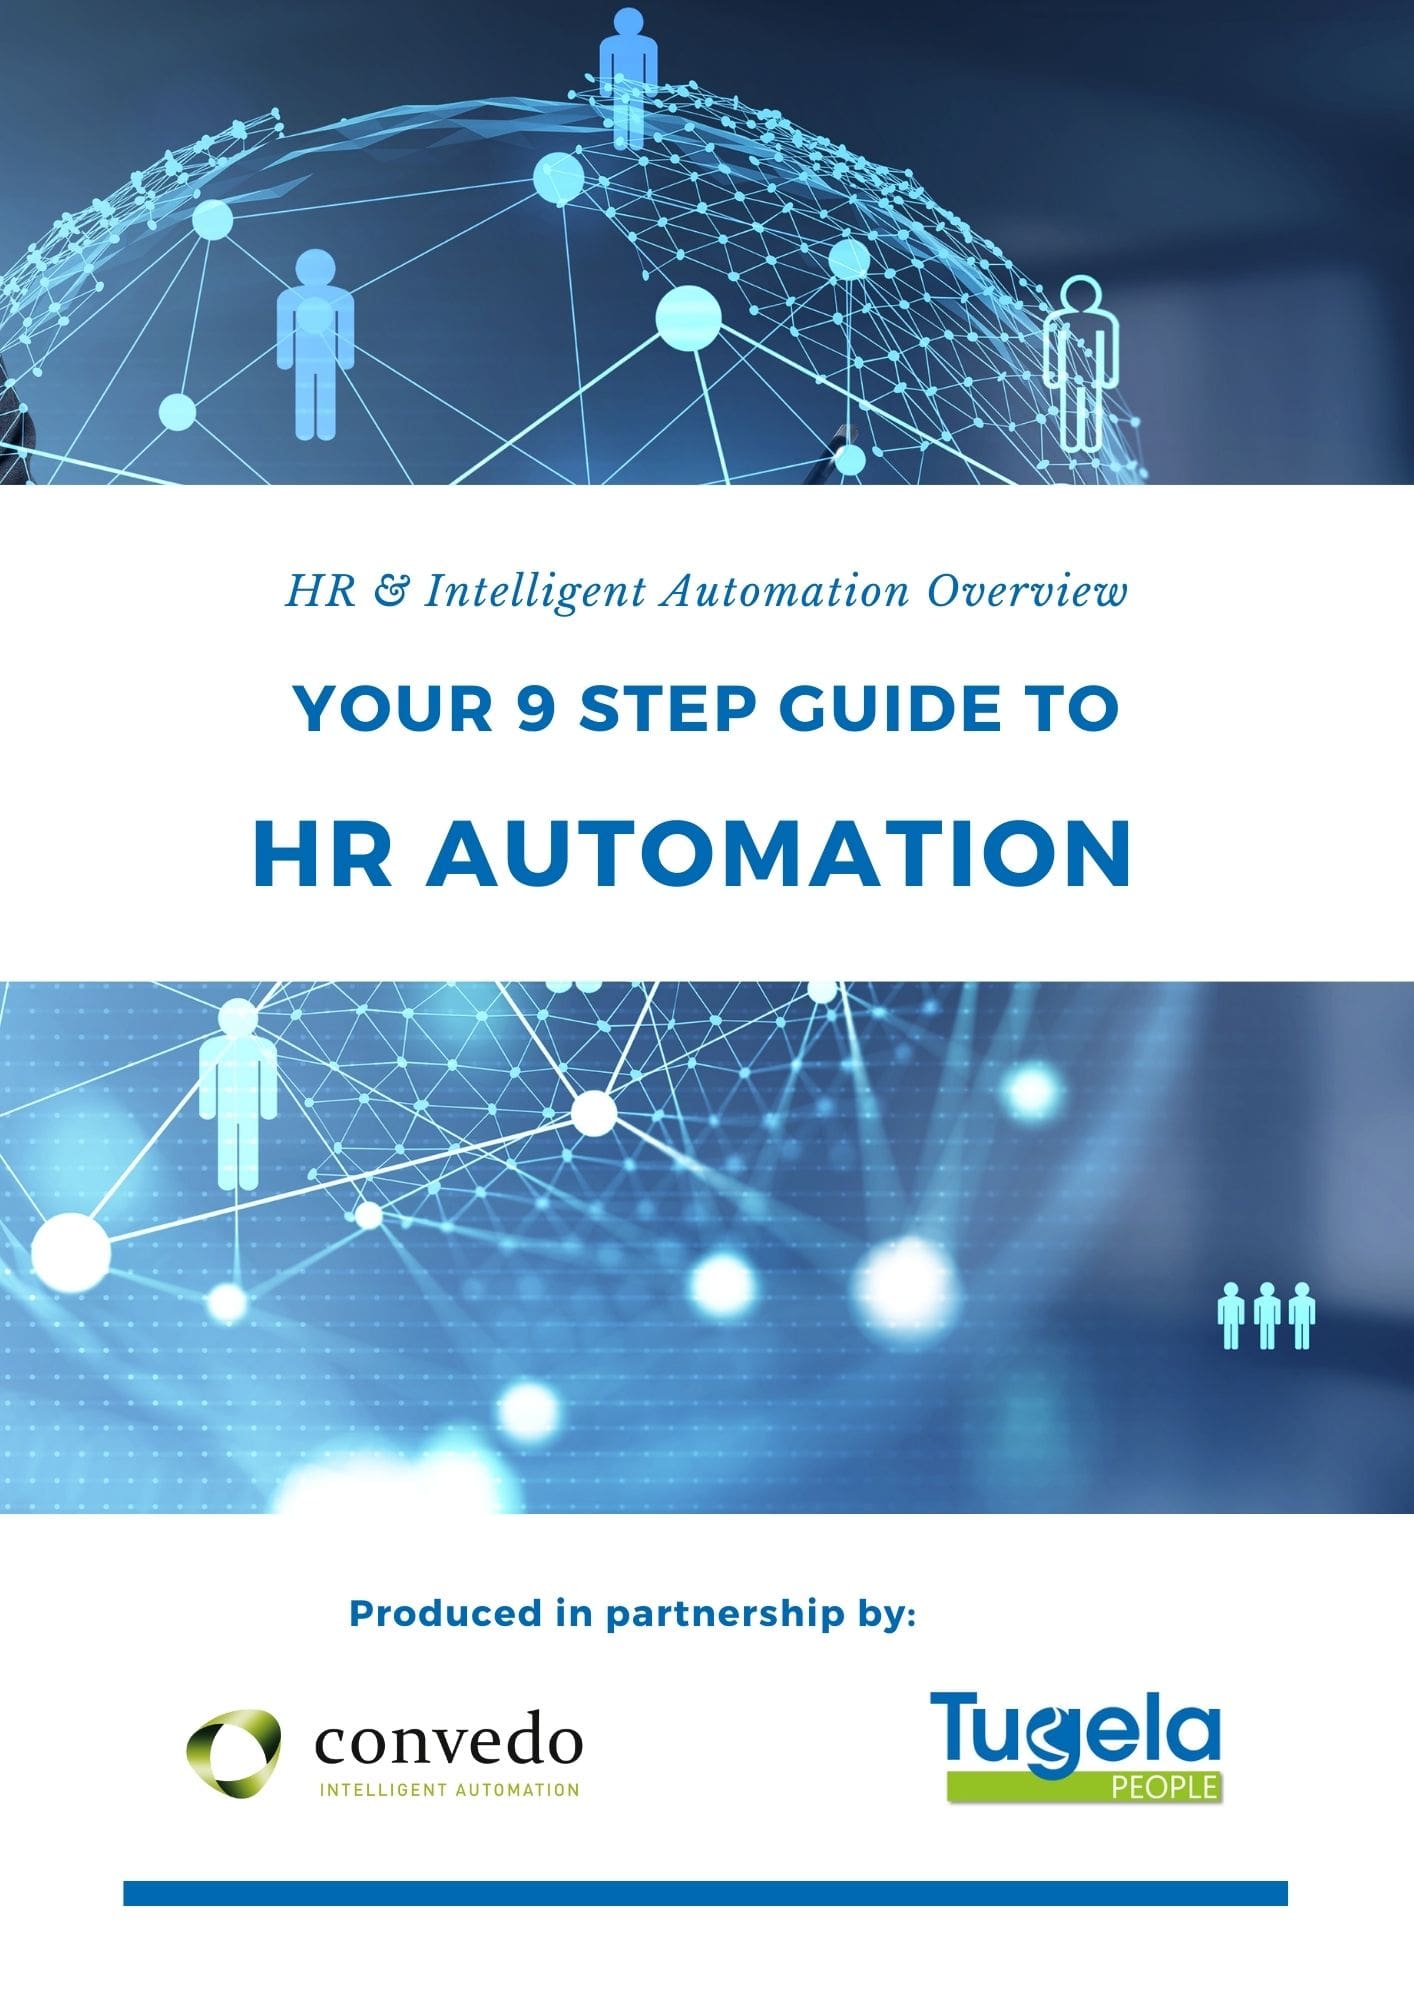 9 steps to HR Automation. Learn more.